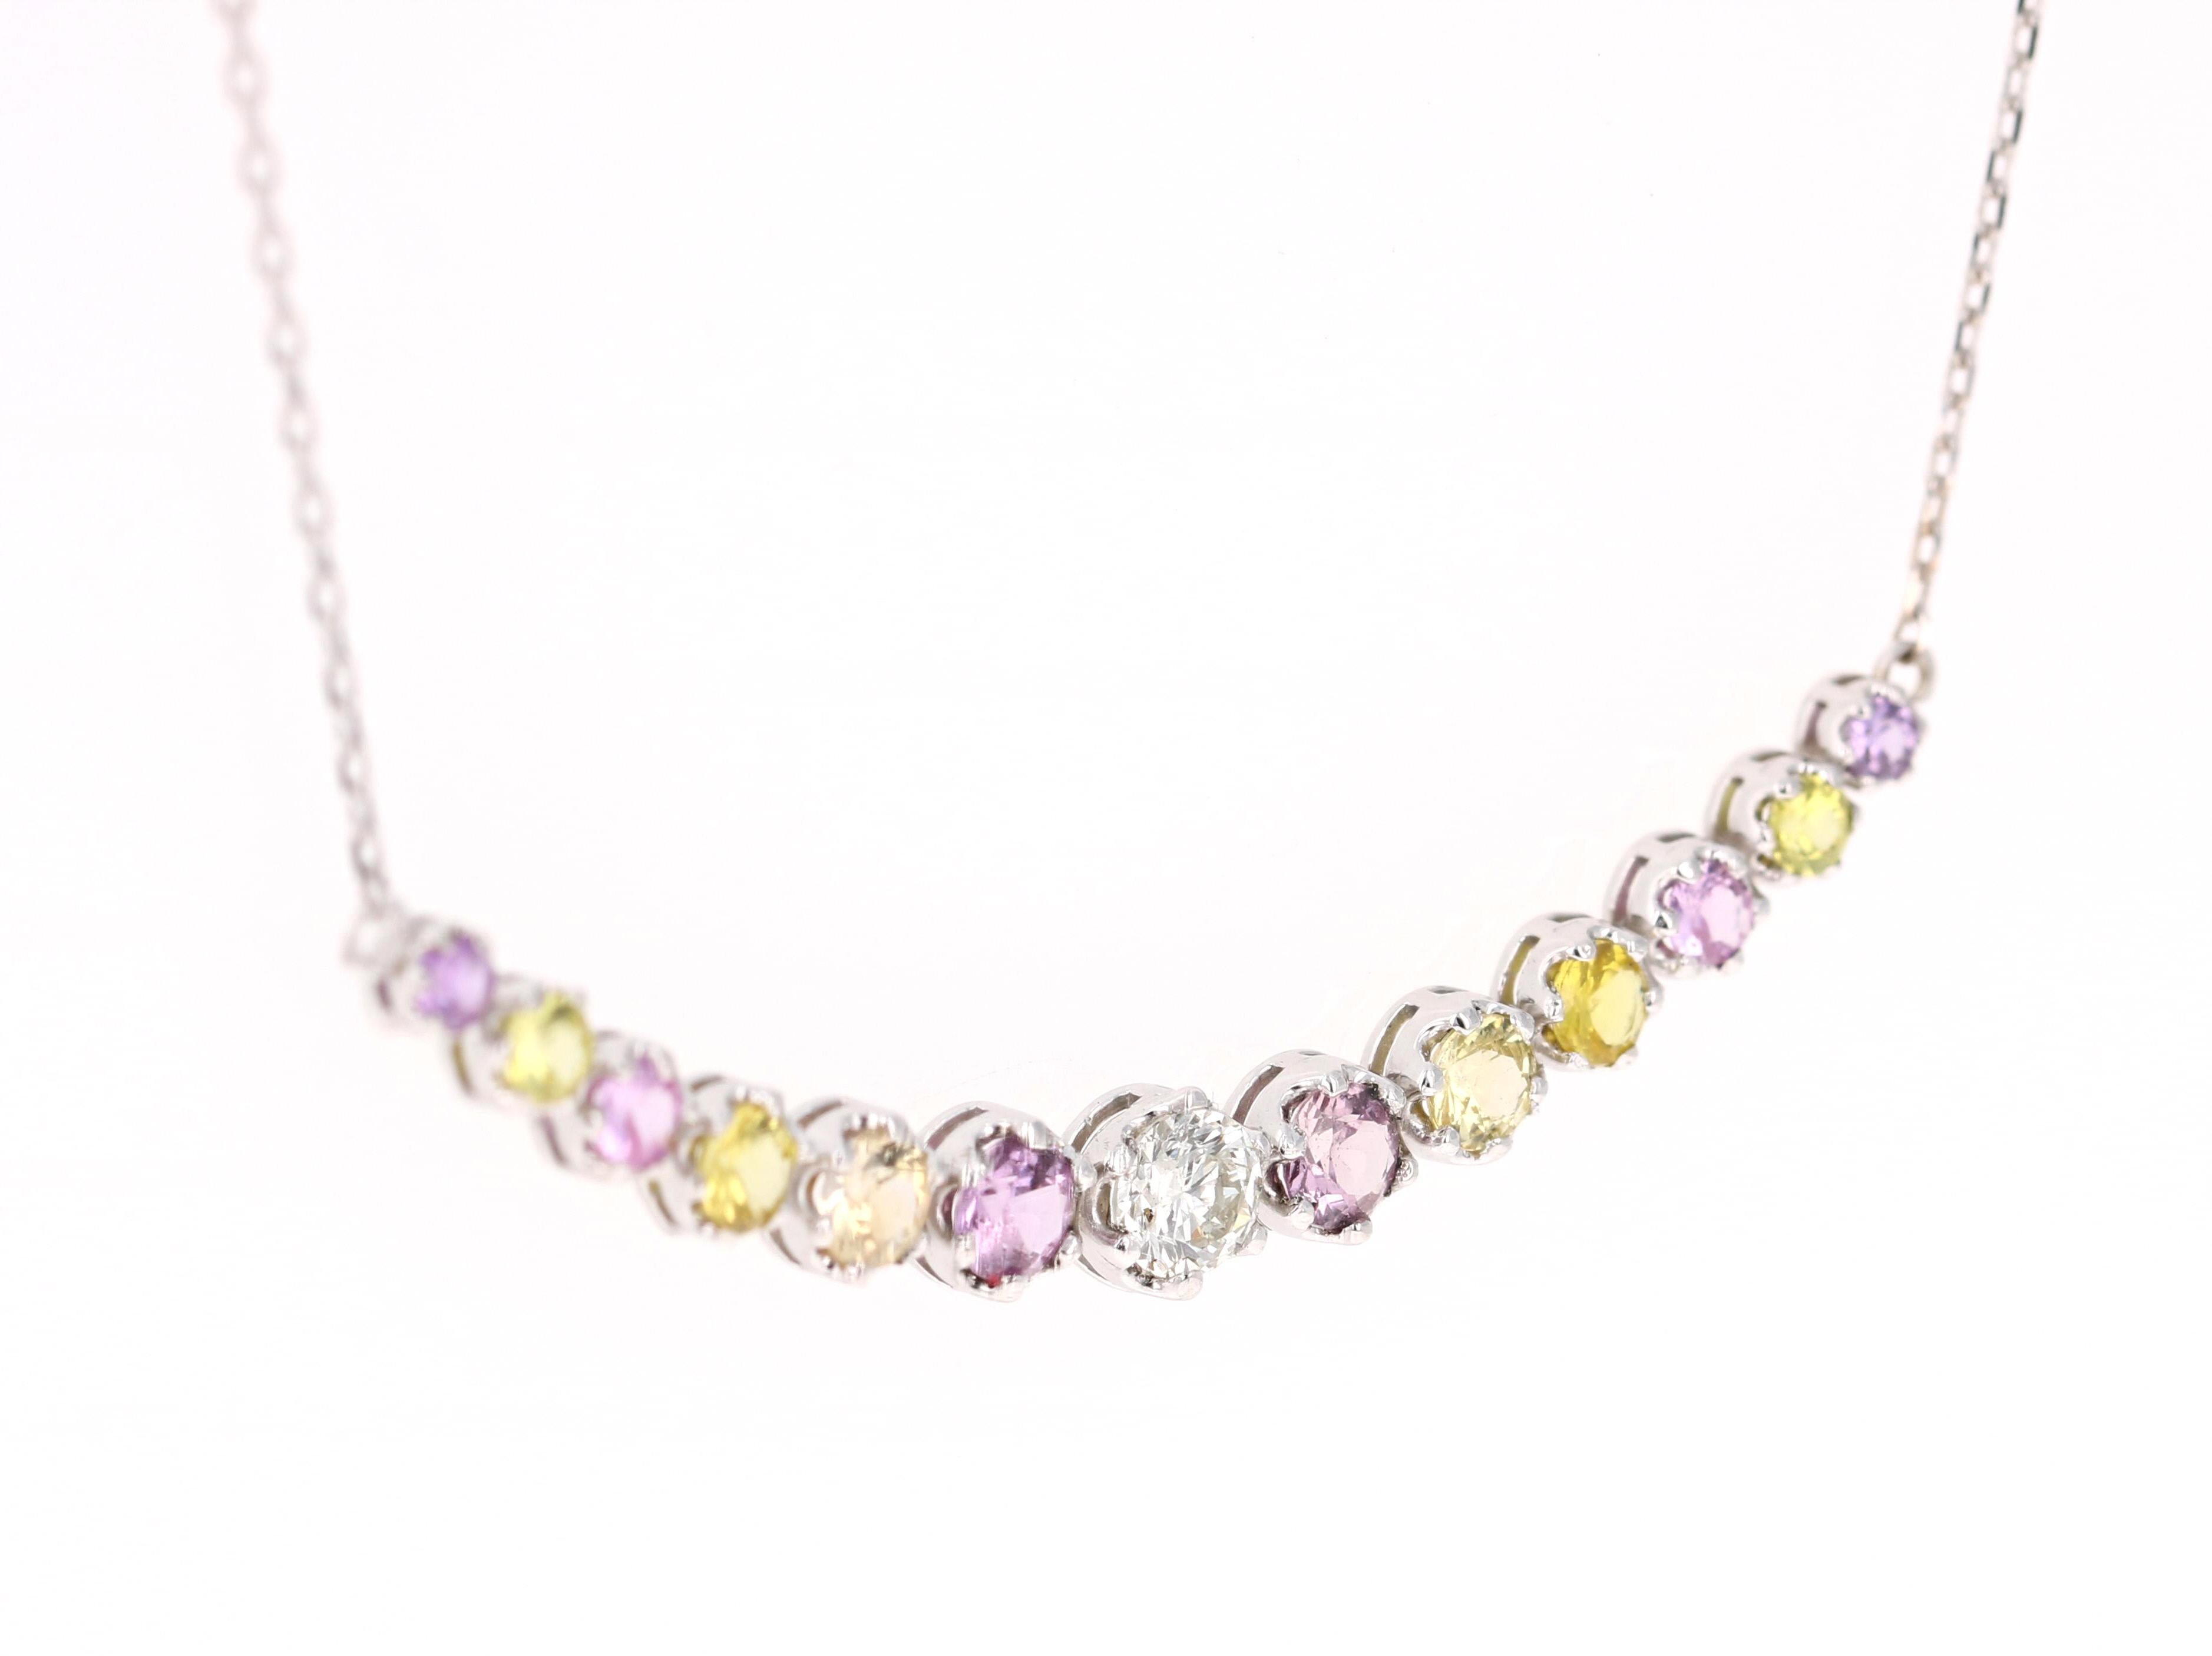 Beautiful Yellow and Pink Sapphire and Diamond Necklace that sits perfectly! 

12 Pink and Yellow Sapphires that weigh 1.54 Carats and a Round Cut Diamond that weighs 0.31 Carats. The total carat weight of the necklace is 1.85 Carats. 

It is